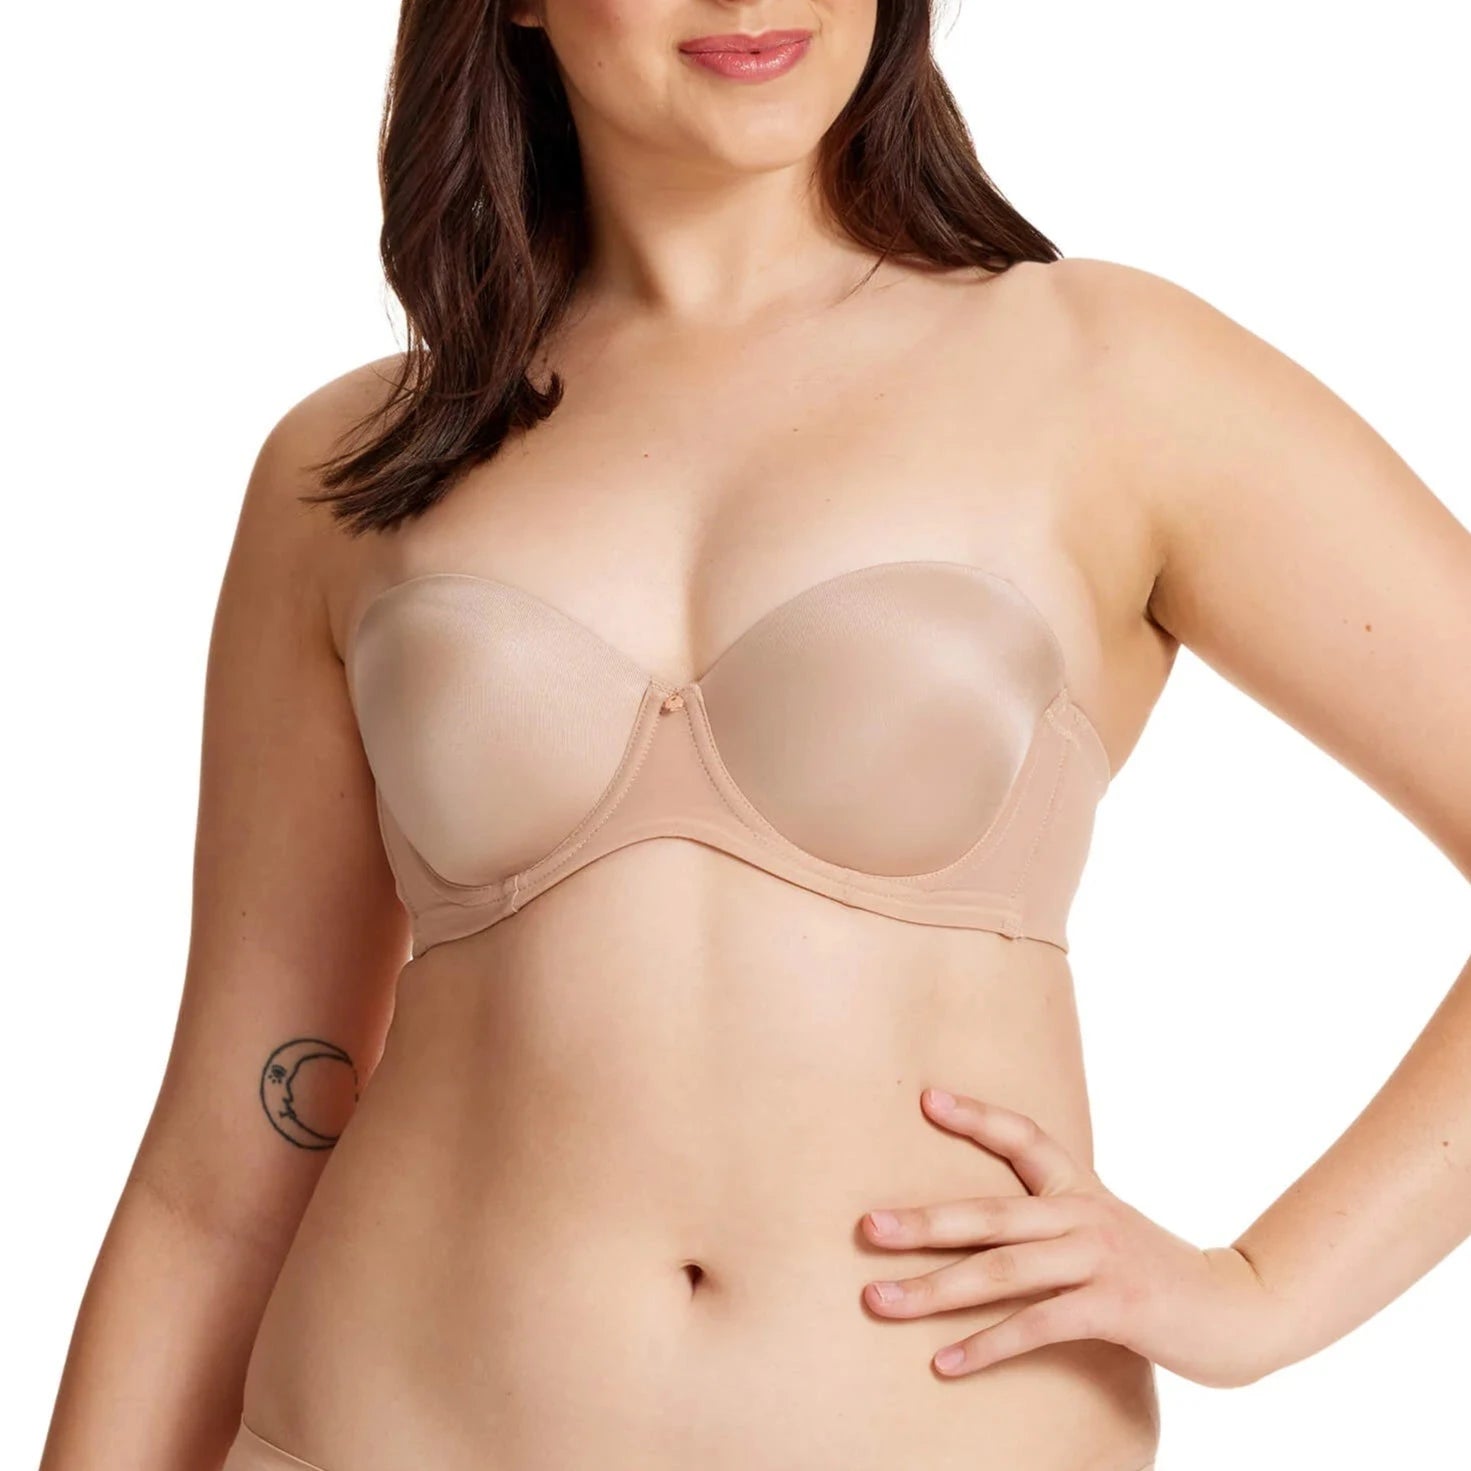  Fine Lines Women's Memory Low Cut Strapless 4 Way Convertible  Bra MM017 32E Skin : Clothing, Shoes & Jewelry